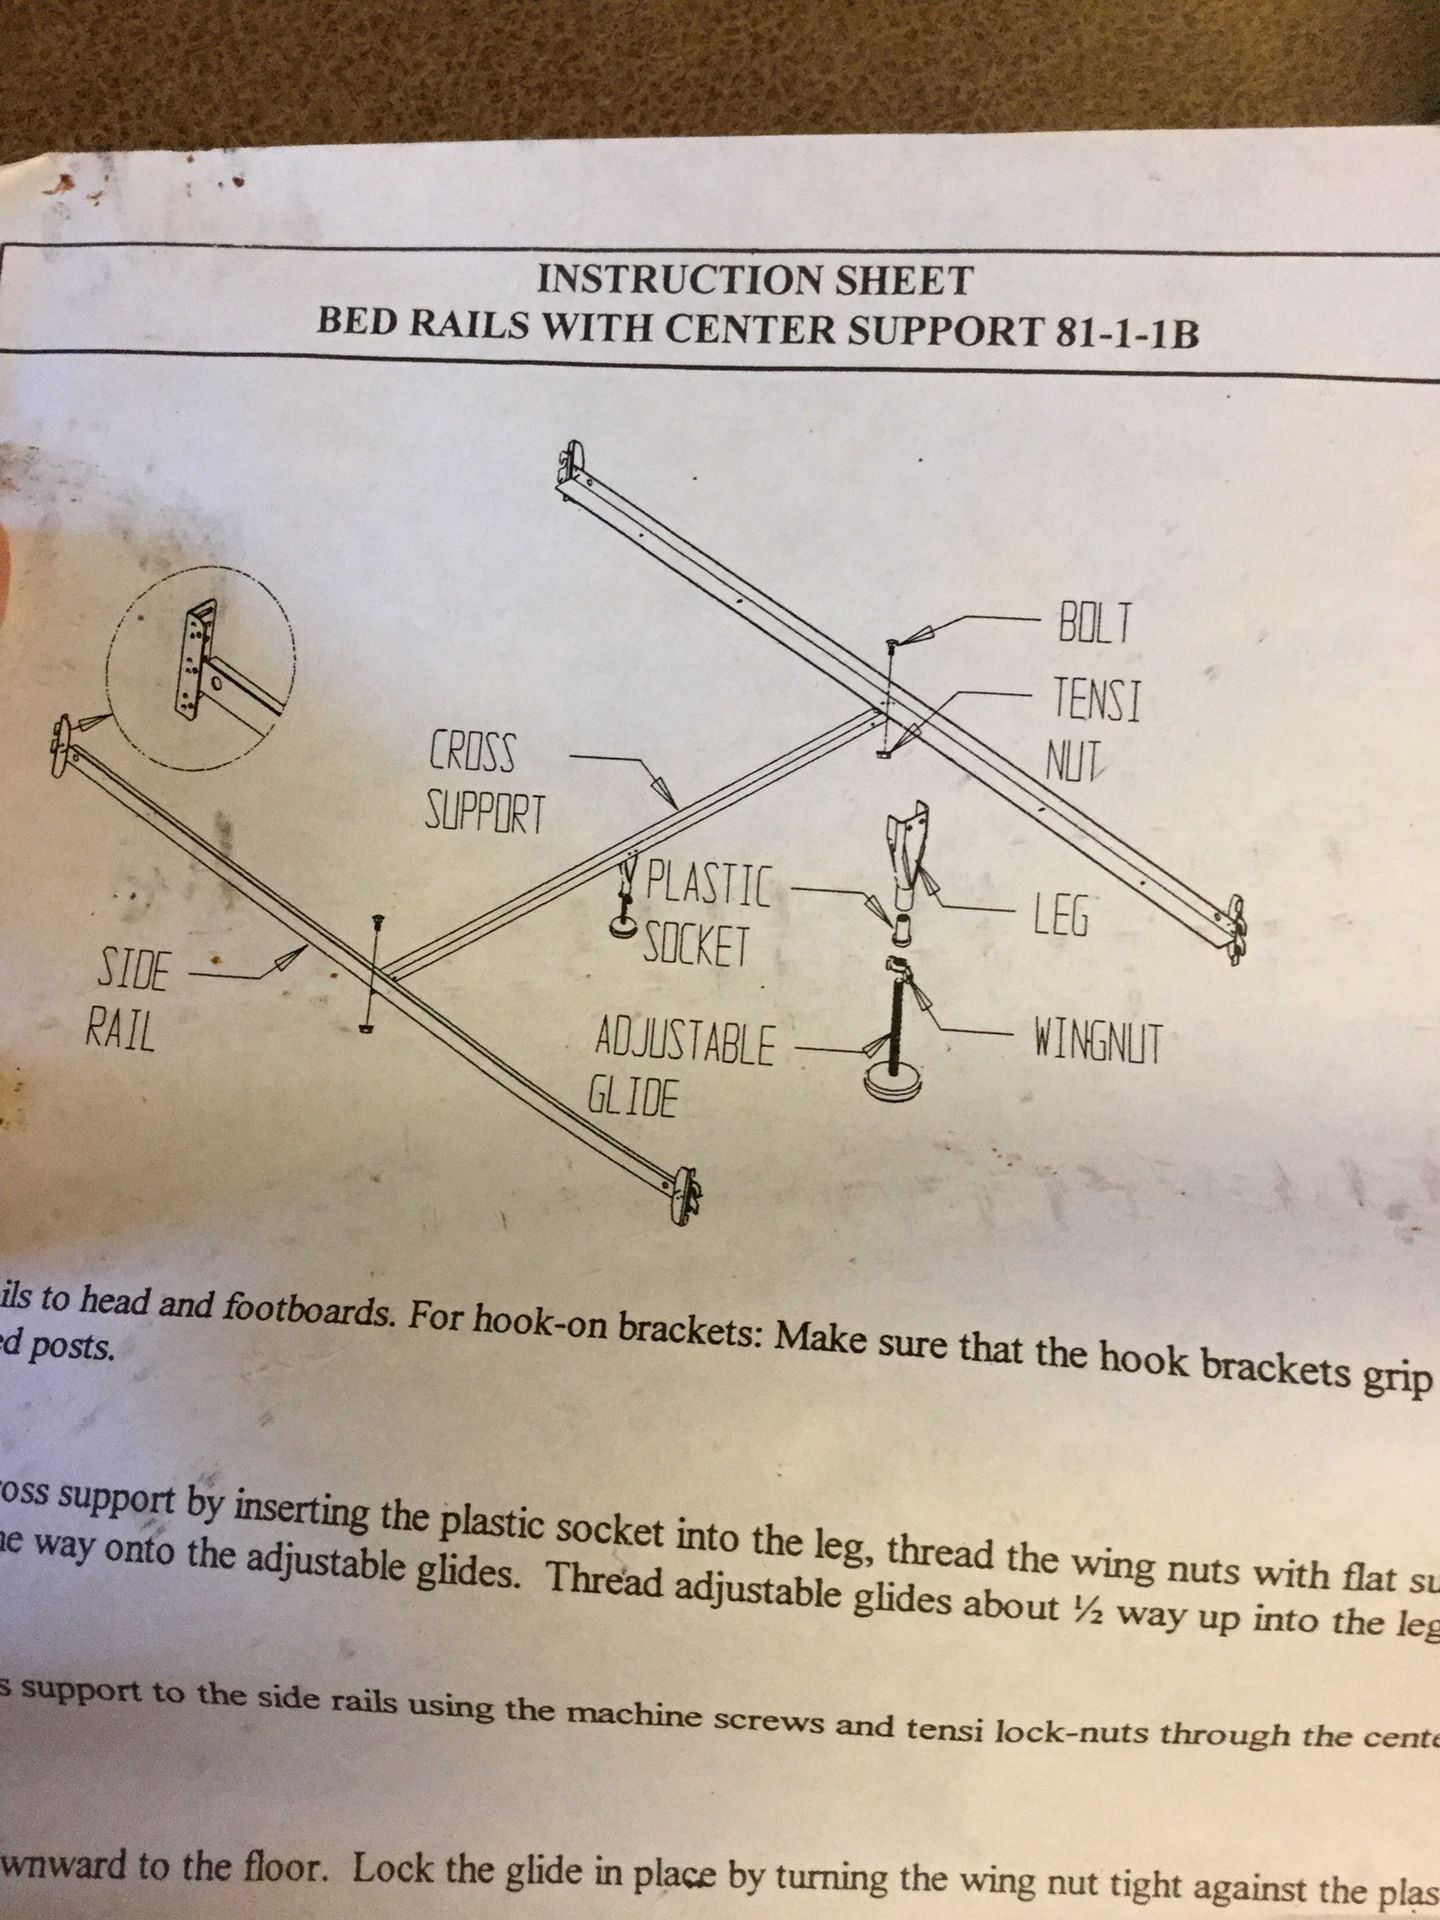 FREE - Queen Bed rails with center support